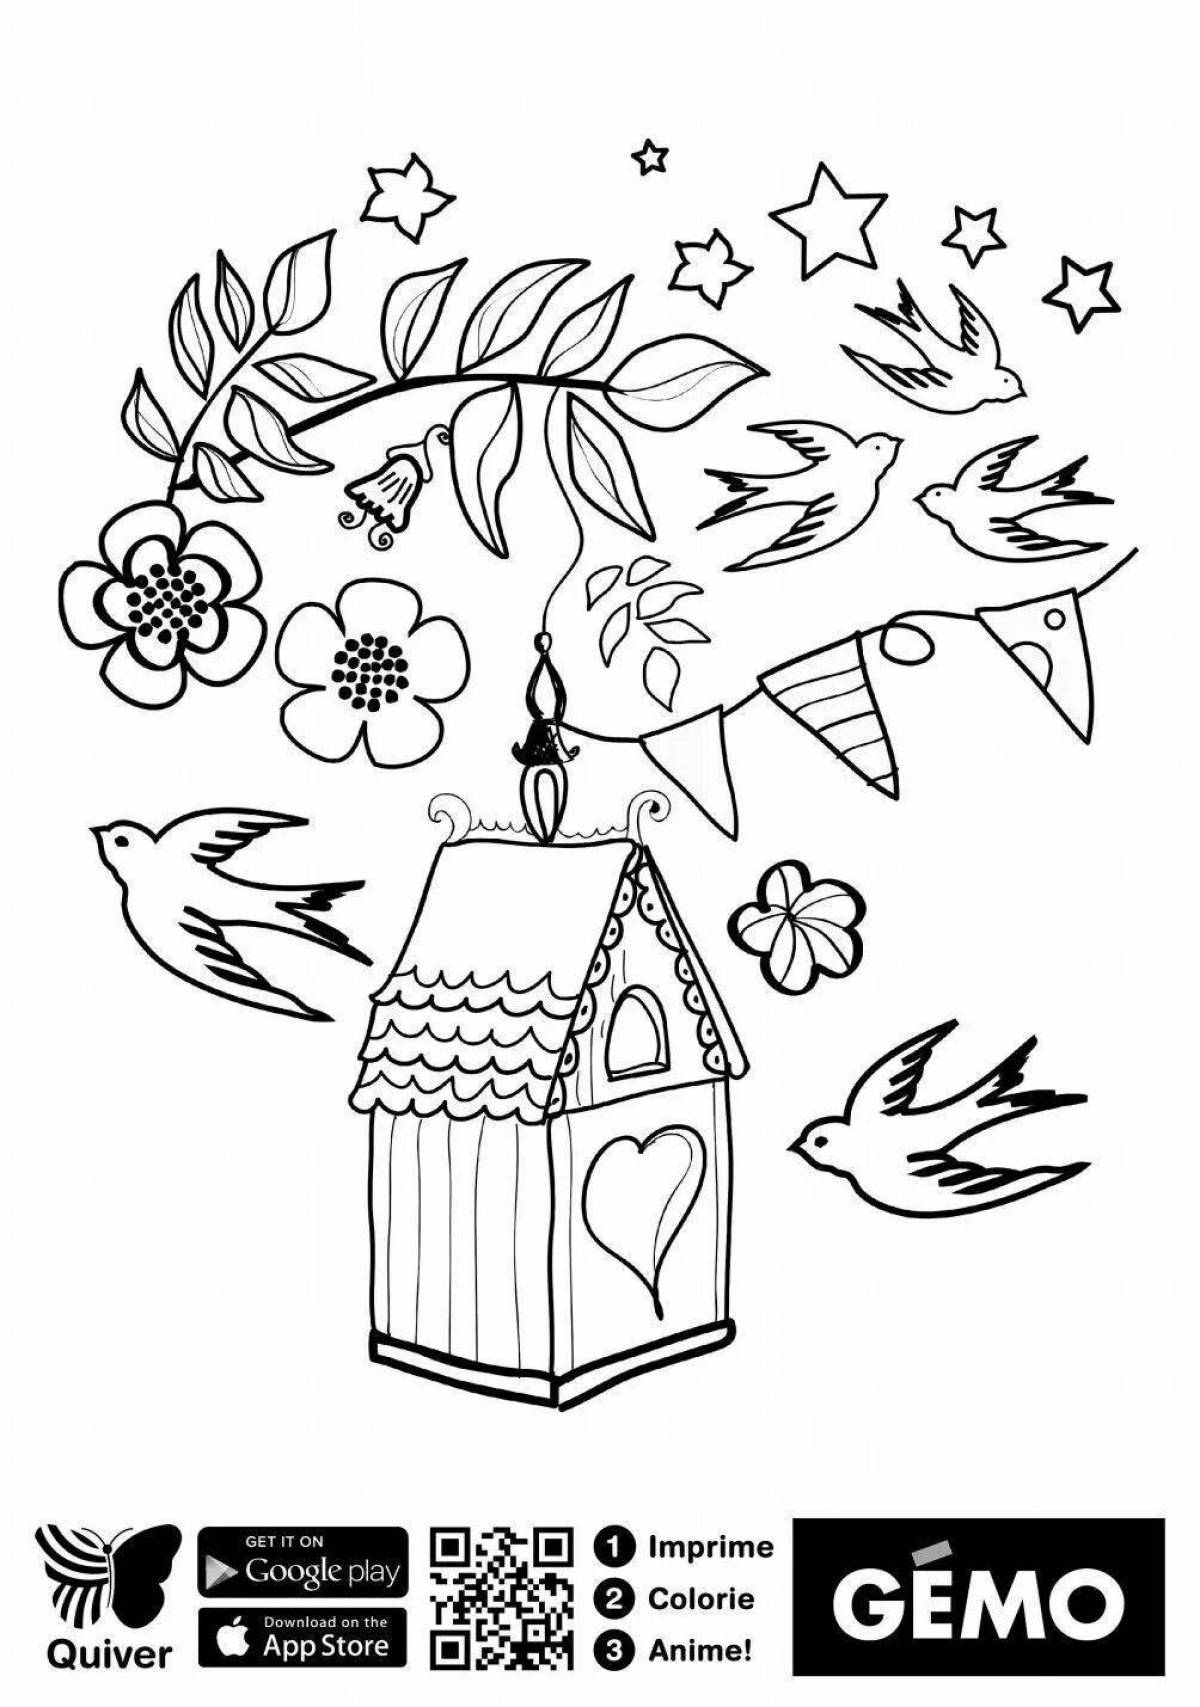 Glittering quiver coloring page